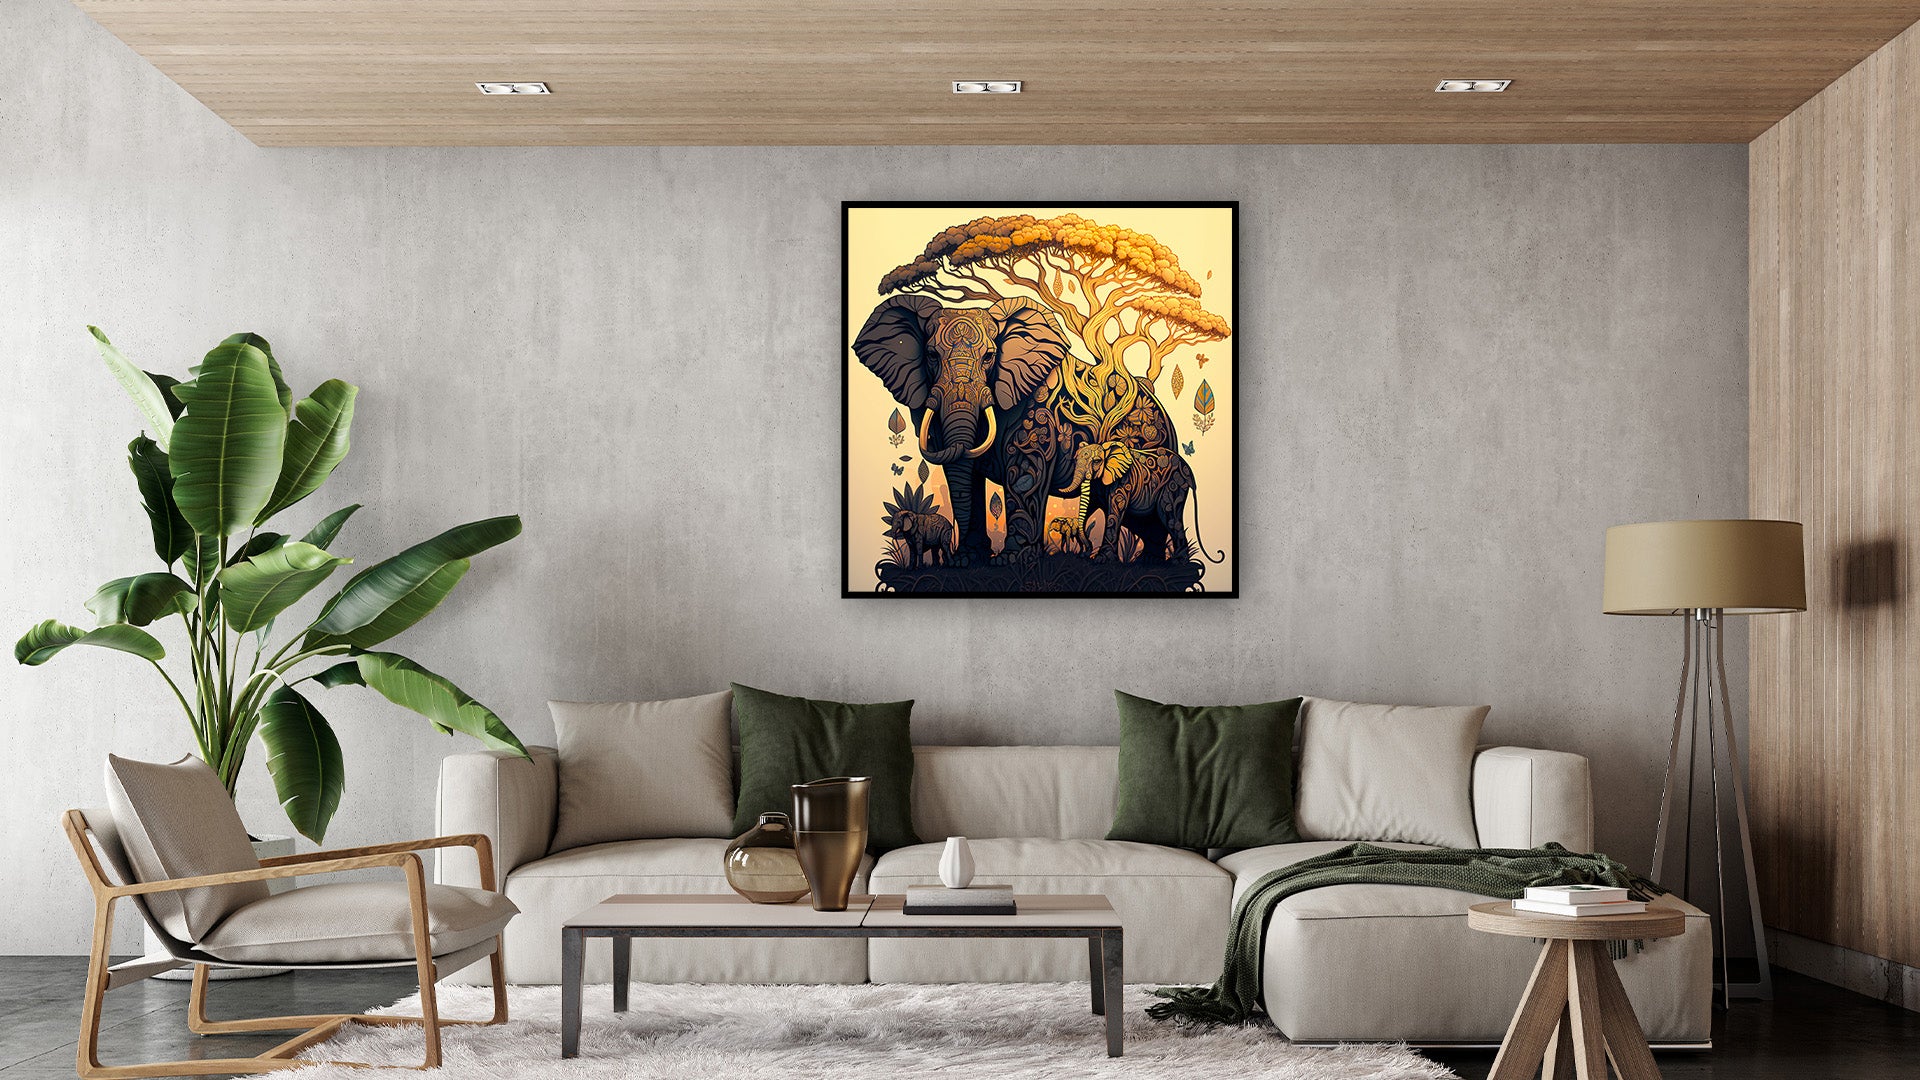 An homage to the African Elephant